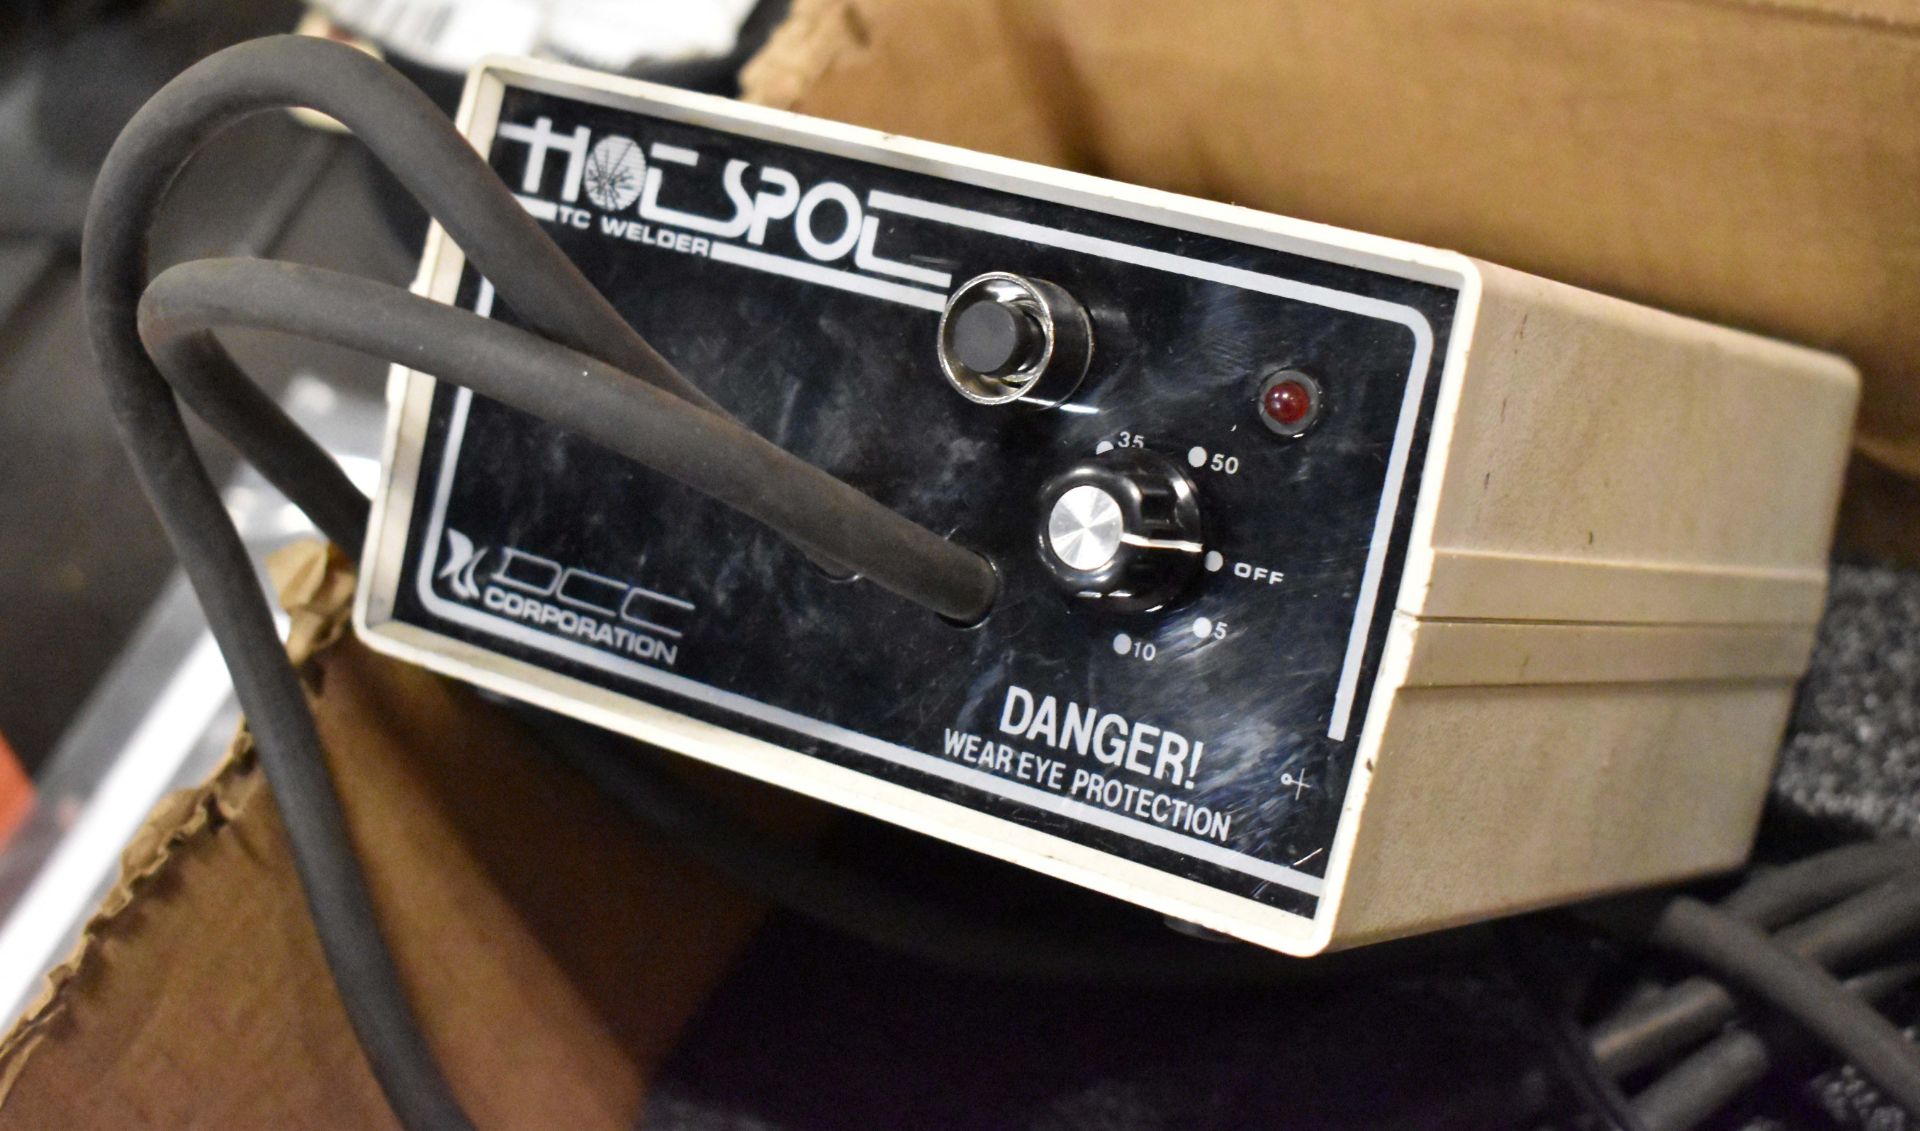 MILLER HOT SPOT THERMOCOUPLE WELDER ATTACHMENT [RIGGING FEES FOR LOT #19 B - $10 USD PLUS APPLICABLE - Bild 2 aus 3